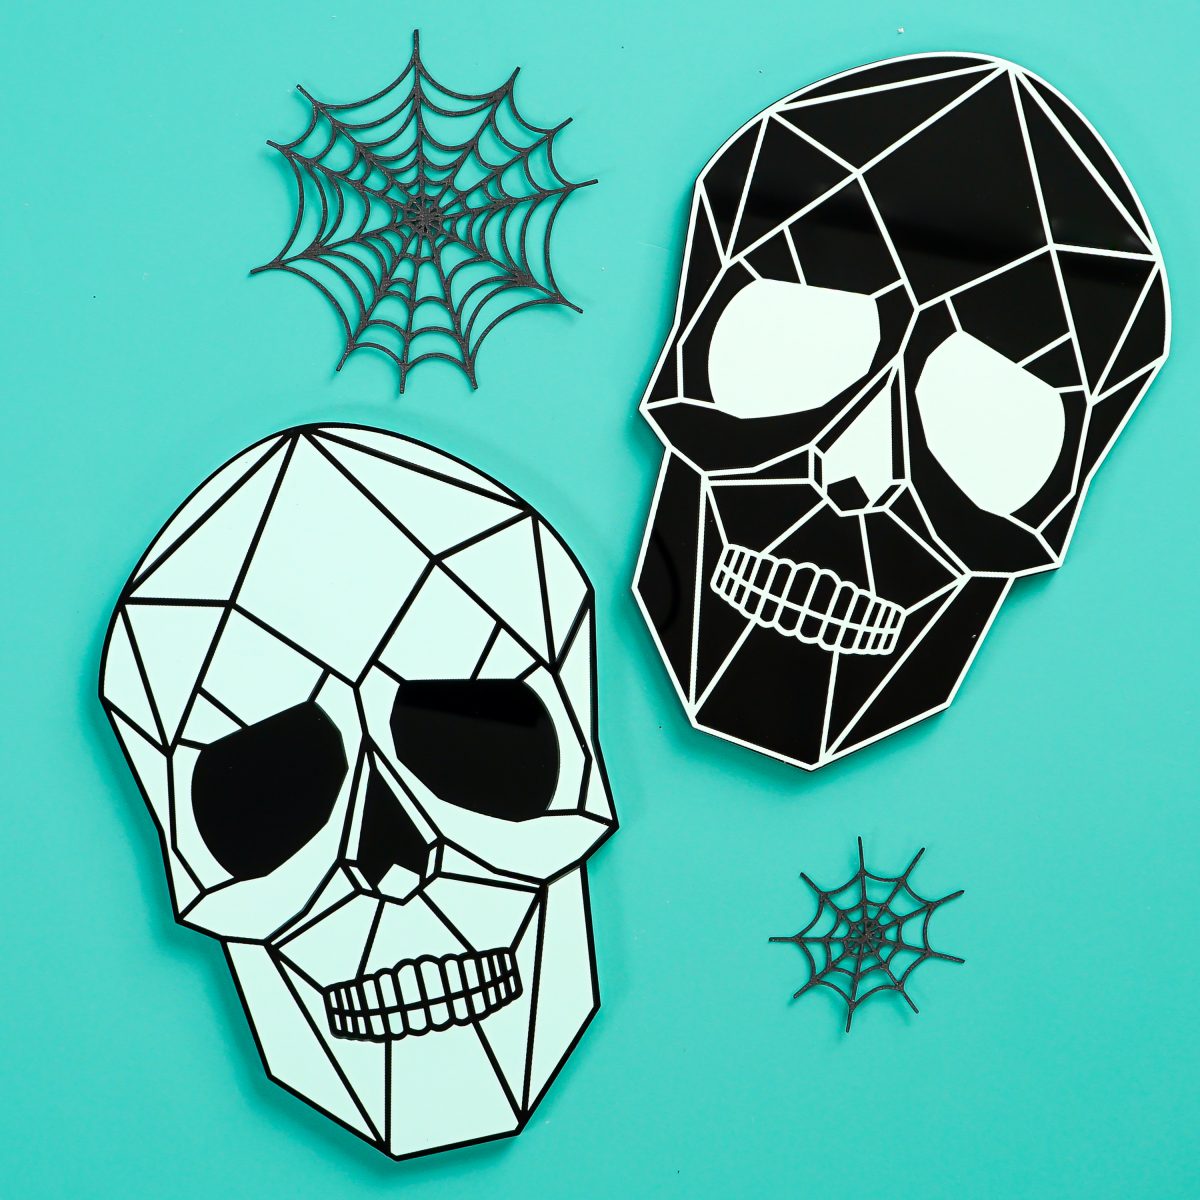 Two skulls on teal background with spider webs